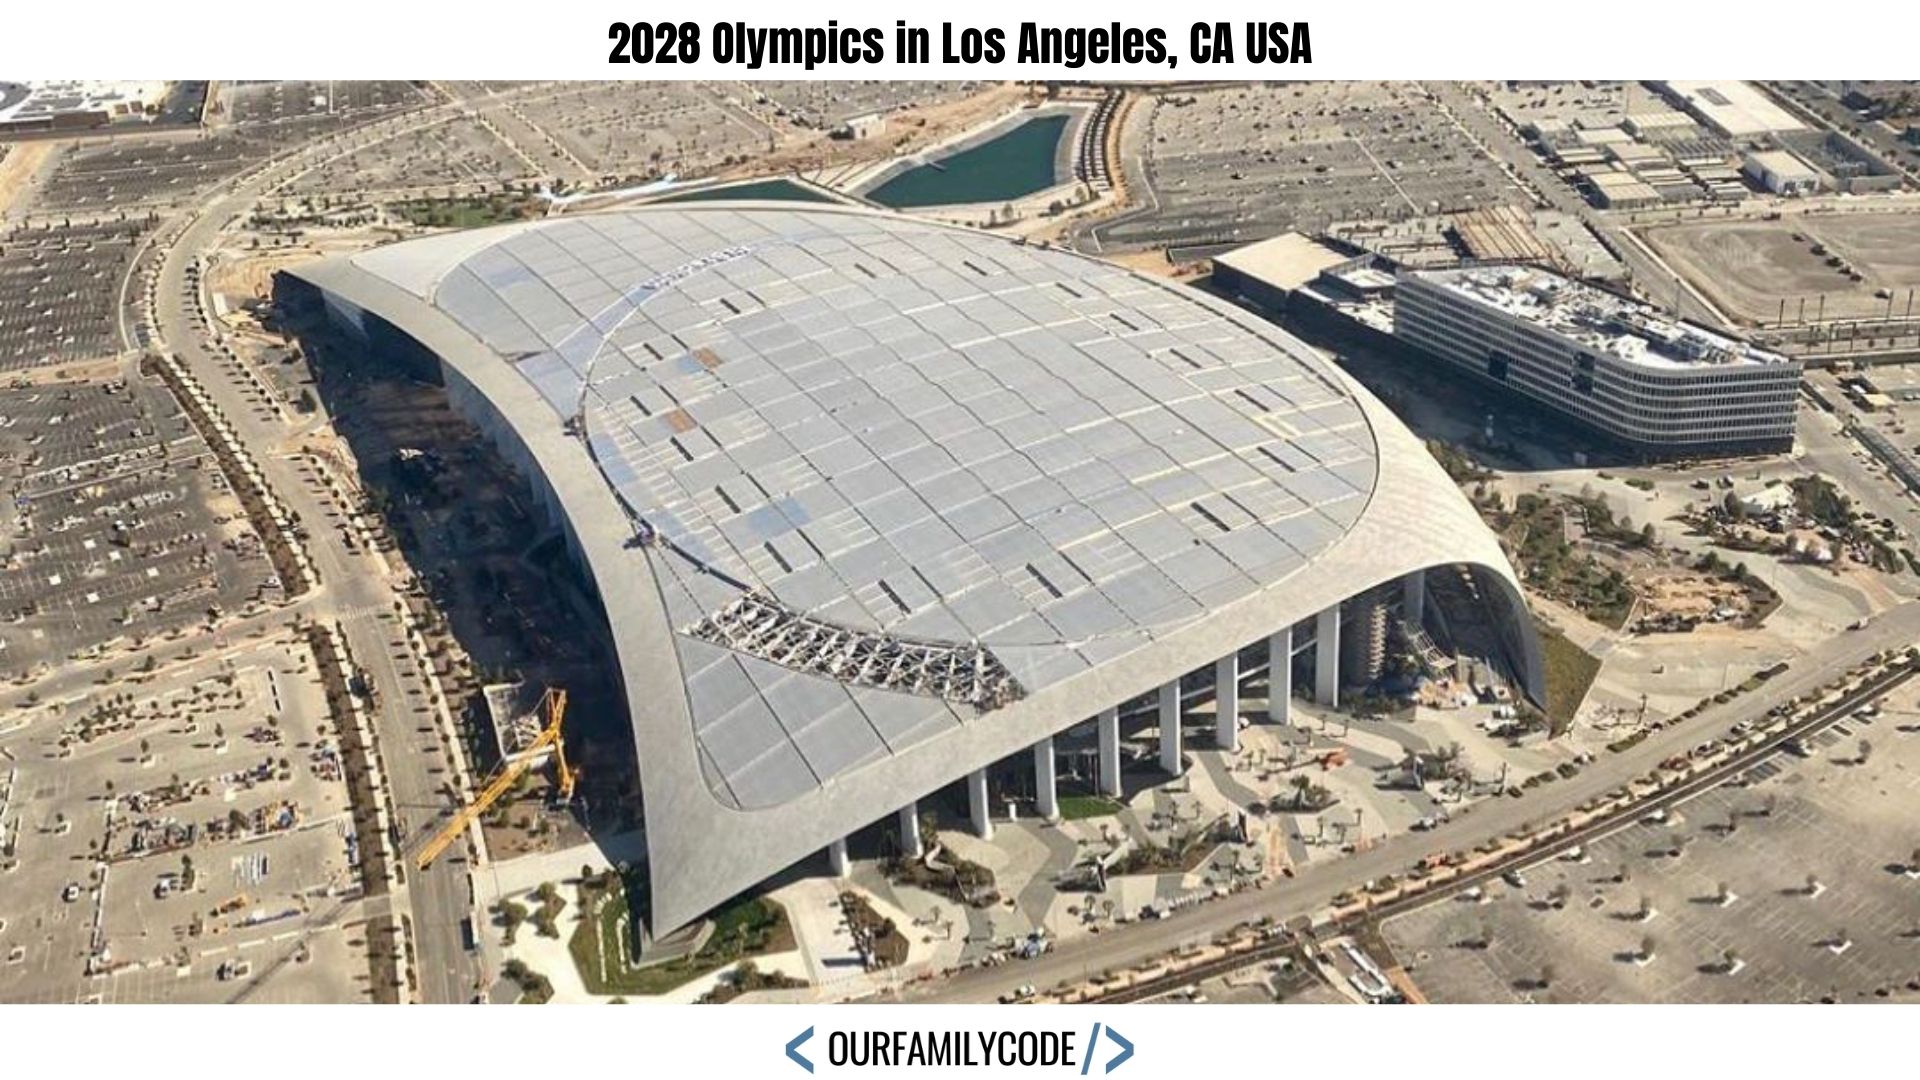 A picture of the SoFi Stadium in Los Angeles, CA that will be renamed and used for the opening and closing ceremonies of the 2028 Summer Olympic Games.